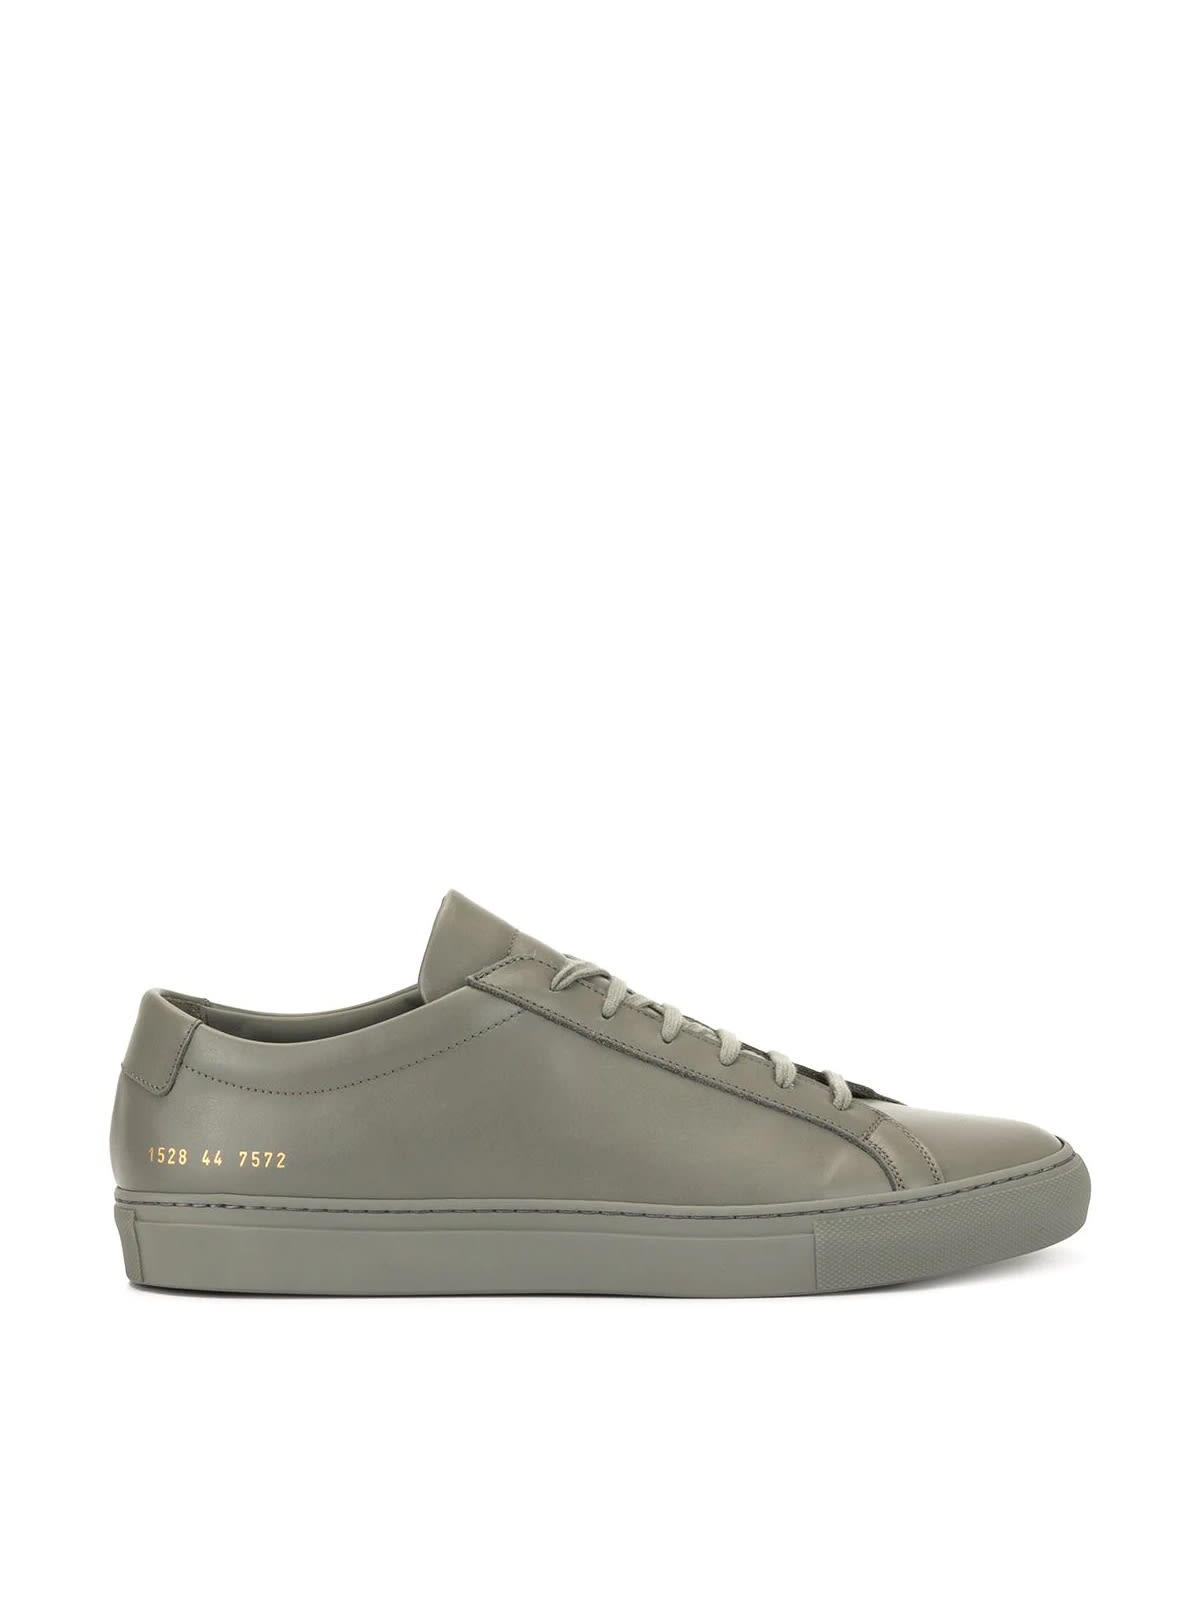 Common Projects 1528 Original Achilles Low Sneakers